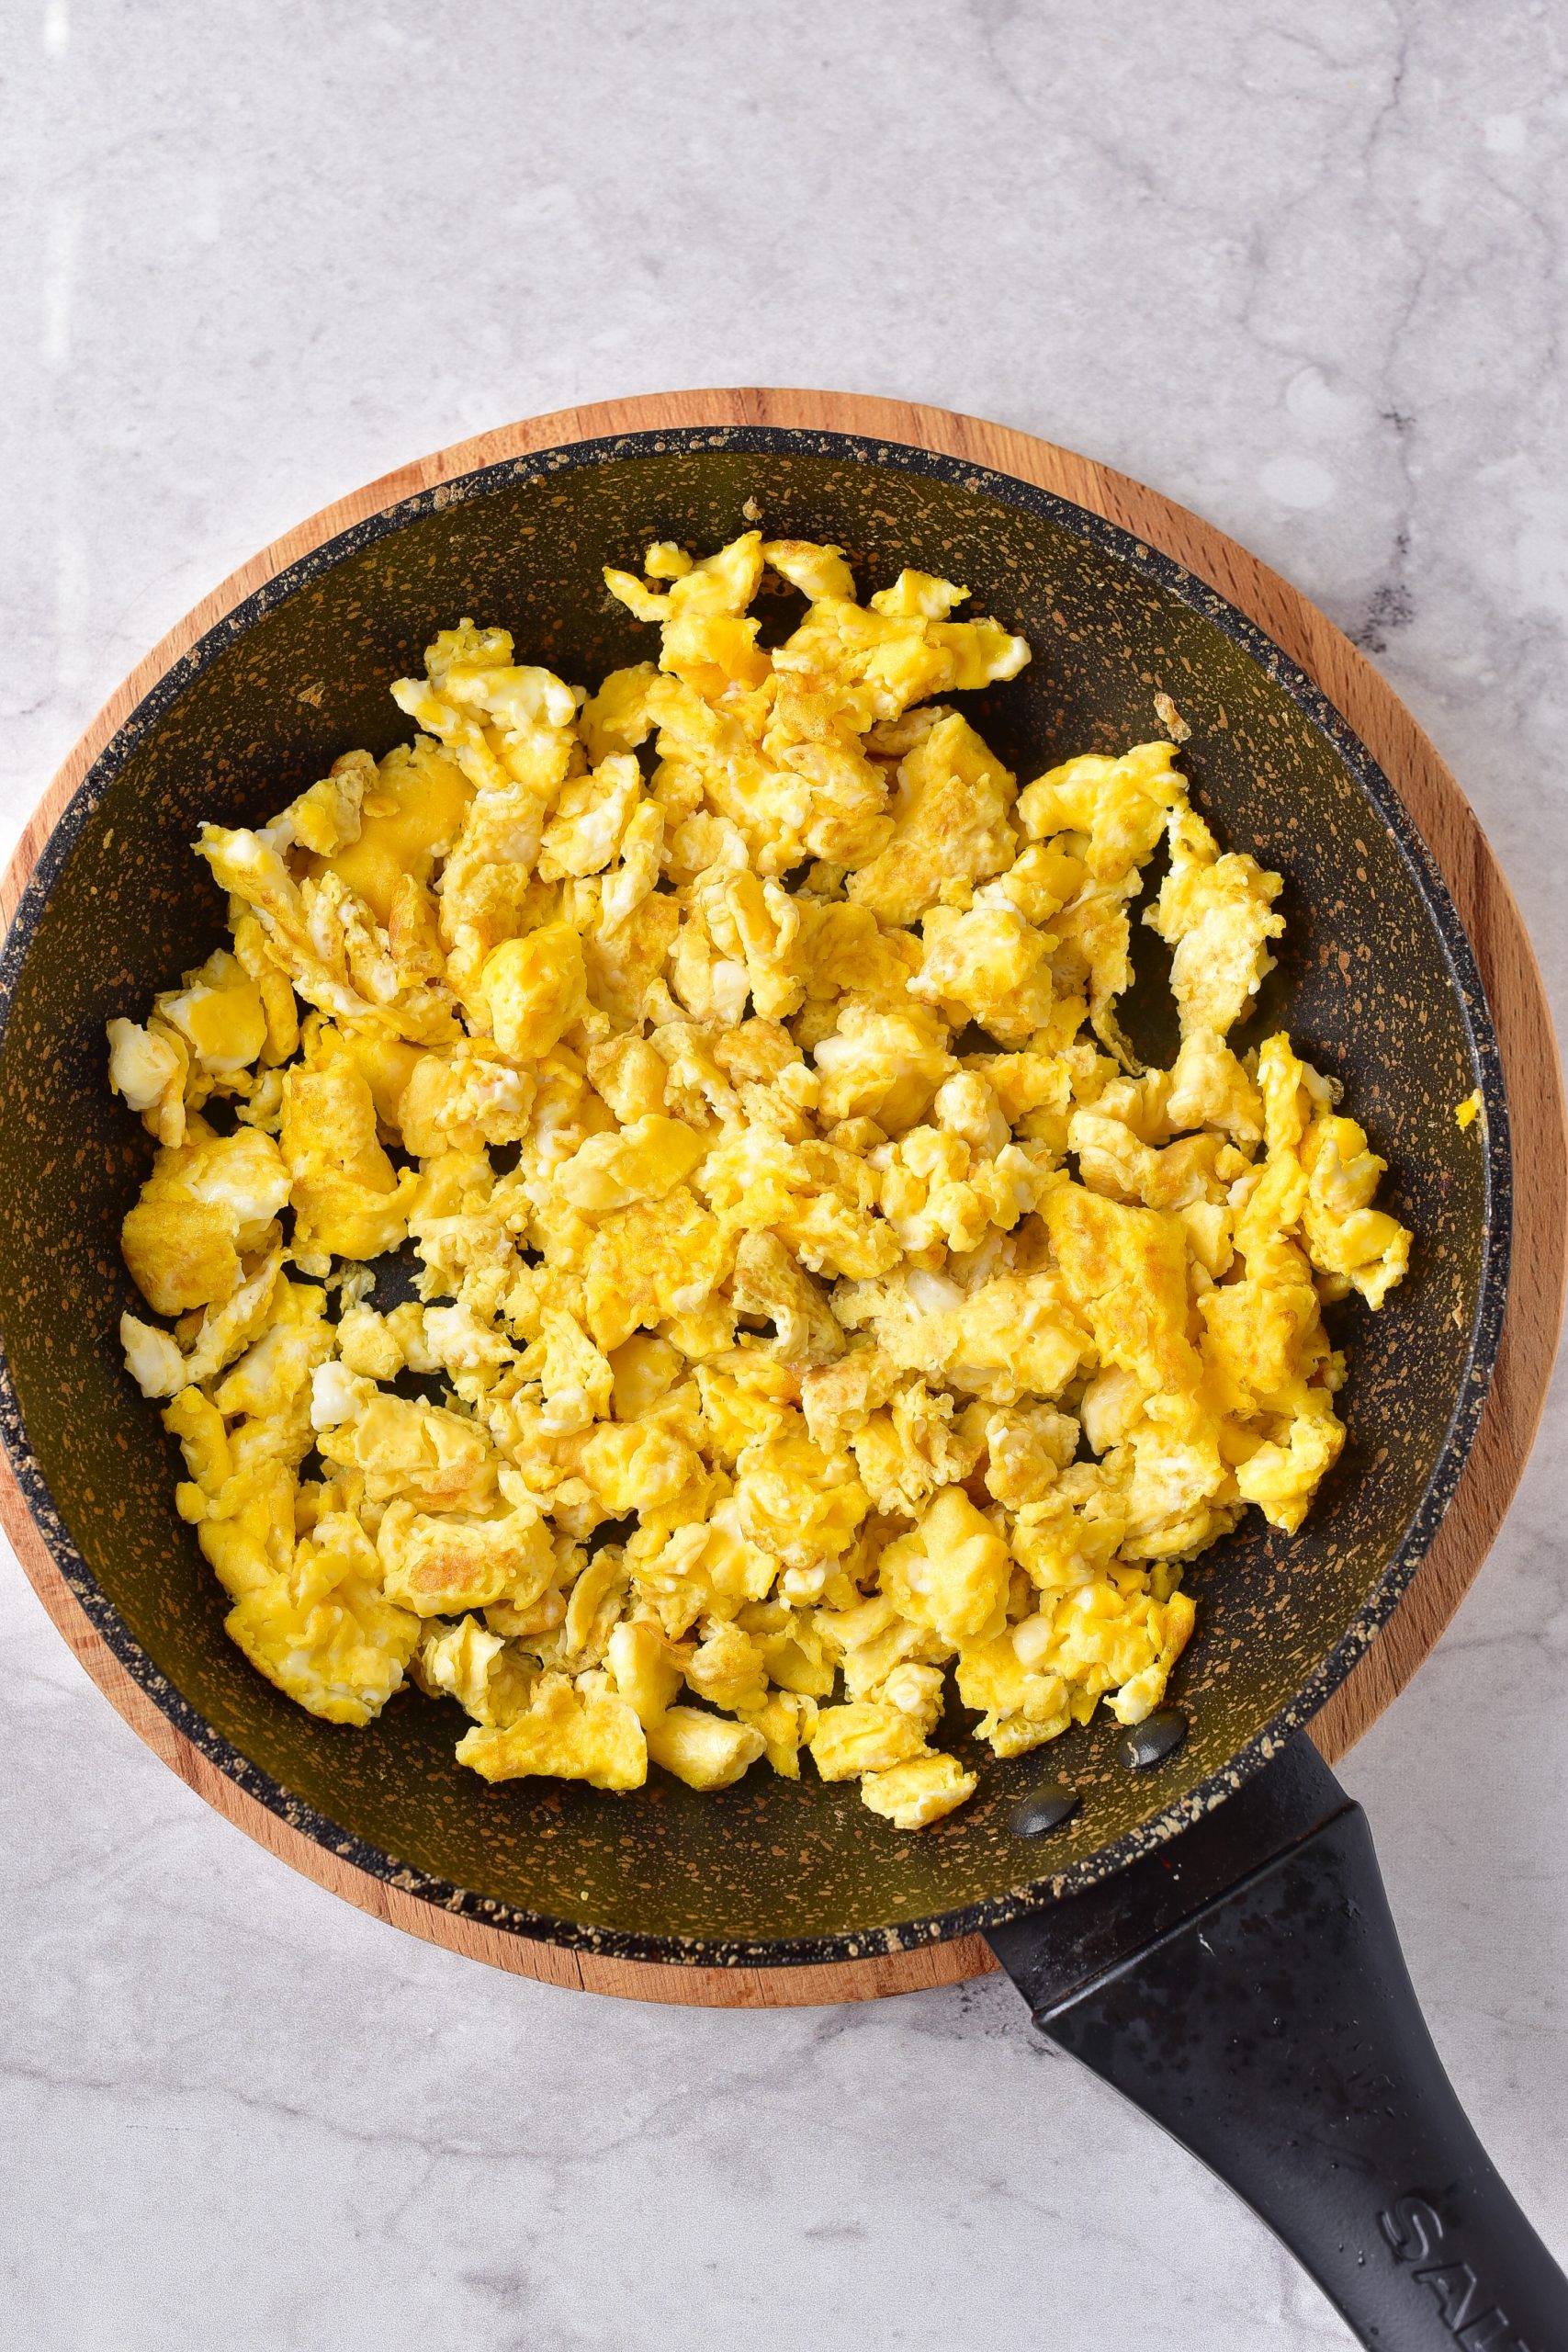 Add your eggs to another skillet over medium heat, and scramble to your liking. 